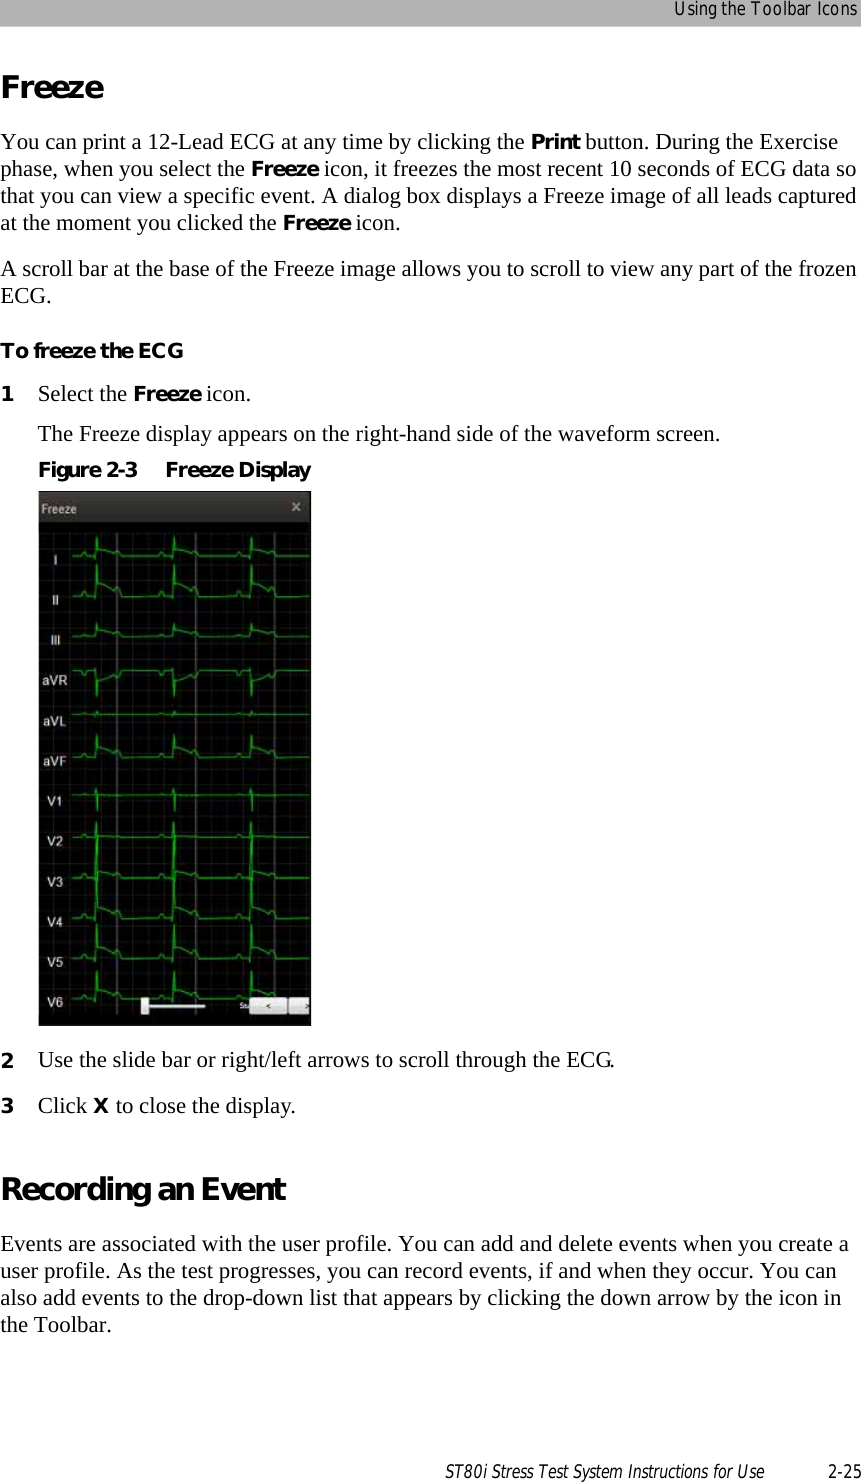 Using the Toolbar IconsST80i Stress Test System Instructions for Use 2-25FreezeYou can print a 12-Lead ECG at any time by clicking the Print button. During the Exercise phase, when you select the Freeze icon, it freezes the most recent 10 seconds of ECG data so that you can view a specific event. A dialog box displays a Freeze image of all leads captured at the moment you clicked the Freeze icon.A scroll bar at the base of the Freeze image allows you to scroll to view any part of the frozen ECG. To freeze the ECG1Select the Freeze icon.The Freeze display appears on the right-hand side of the waveform screen.Figure 2-3 Freeze Display2Use the slide bar or right/left arrows to scroll through the ECG.3Click X to close the display.Recording an Event Events are associated with the user profile. You can add and delete events when you create a user profile. As the test progresses, you can record events, if and when they occur. You can also add events to the drop-down list that appears by clicking the down arrow by the icon in the Toolbar.